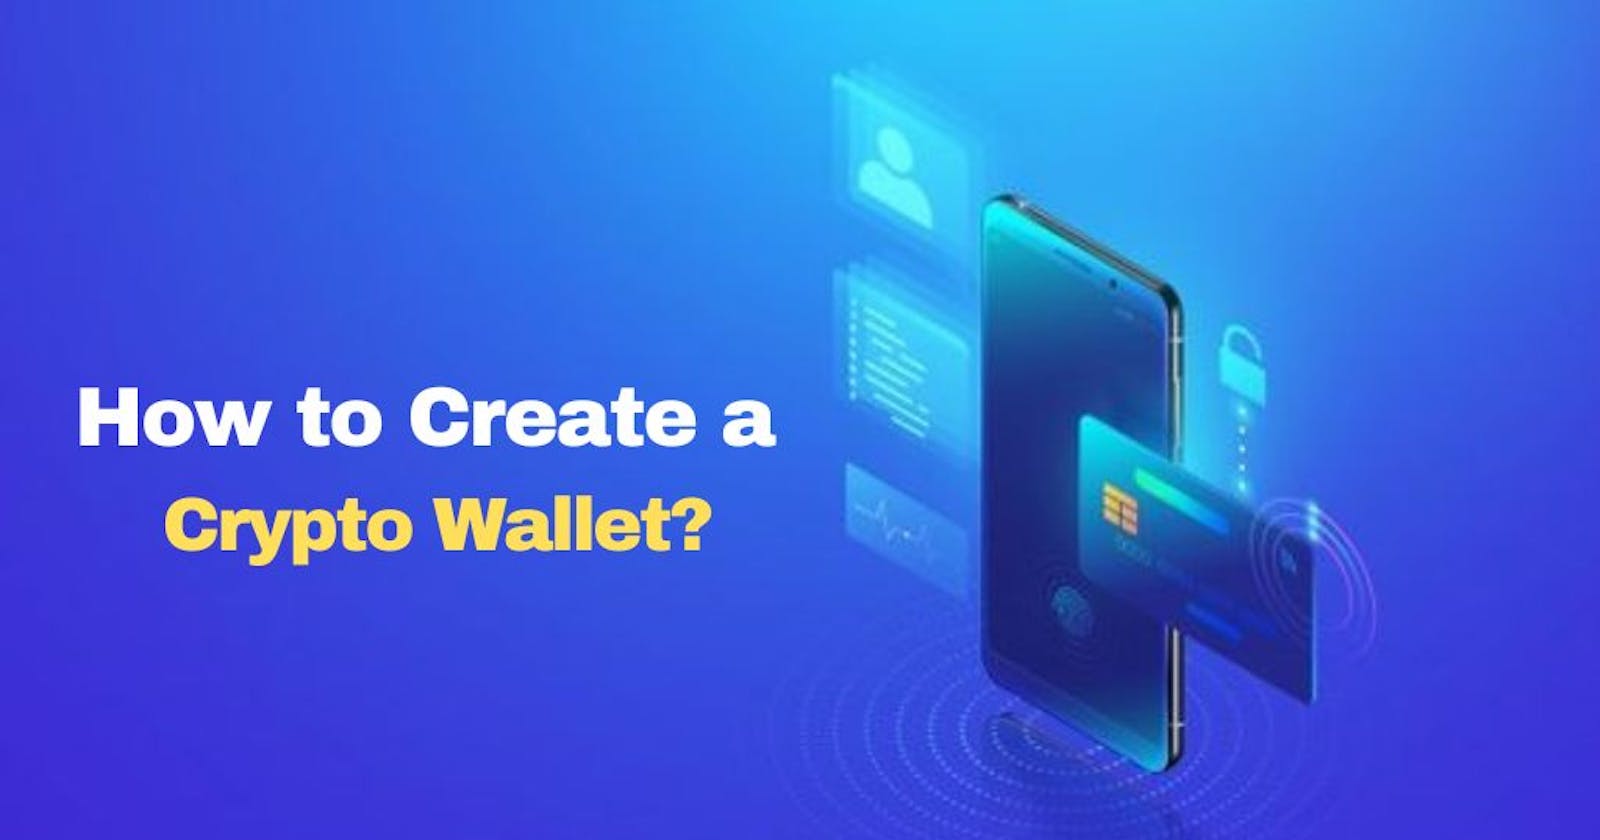 How to create a crypto wallet??